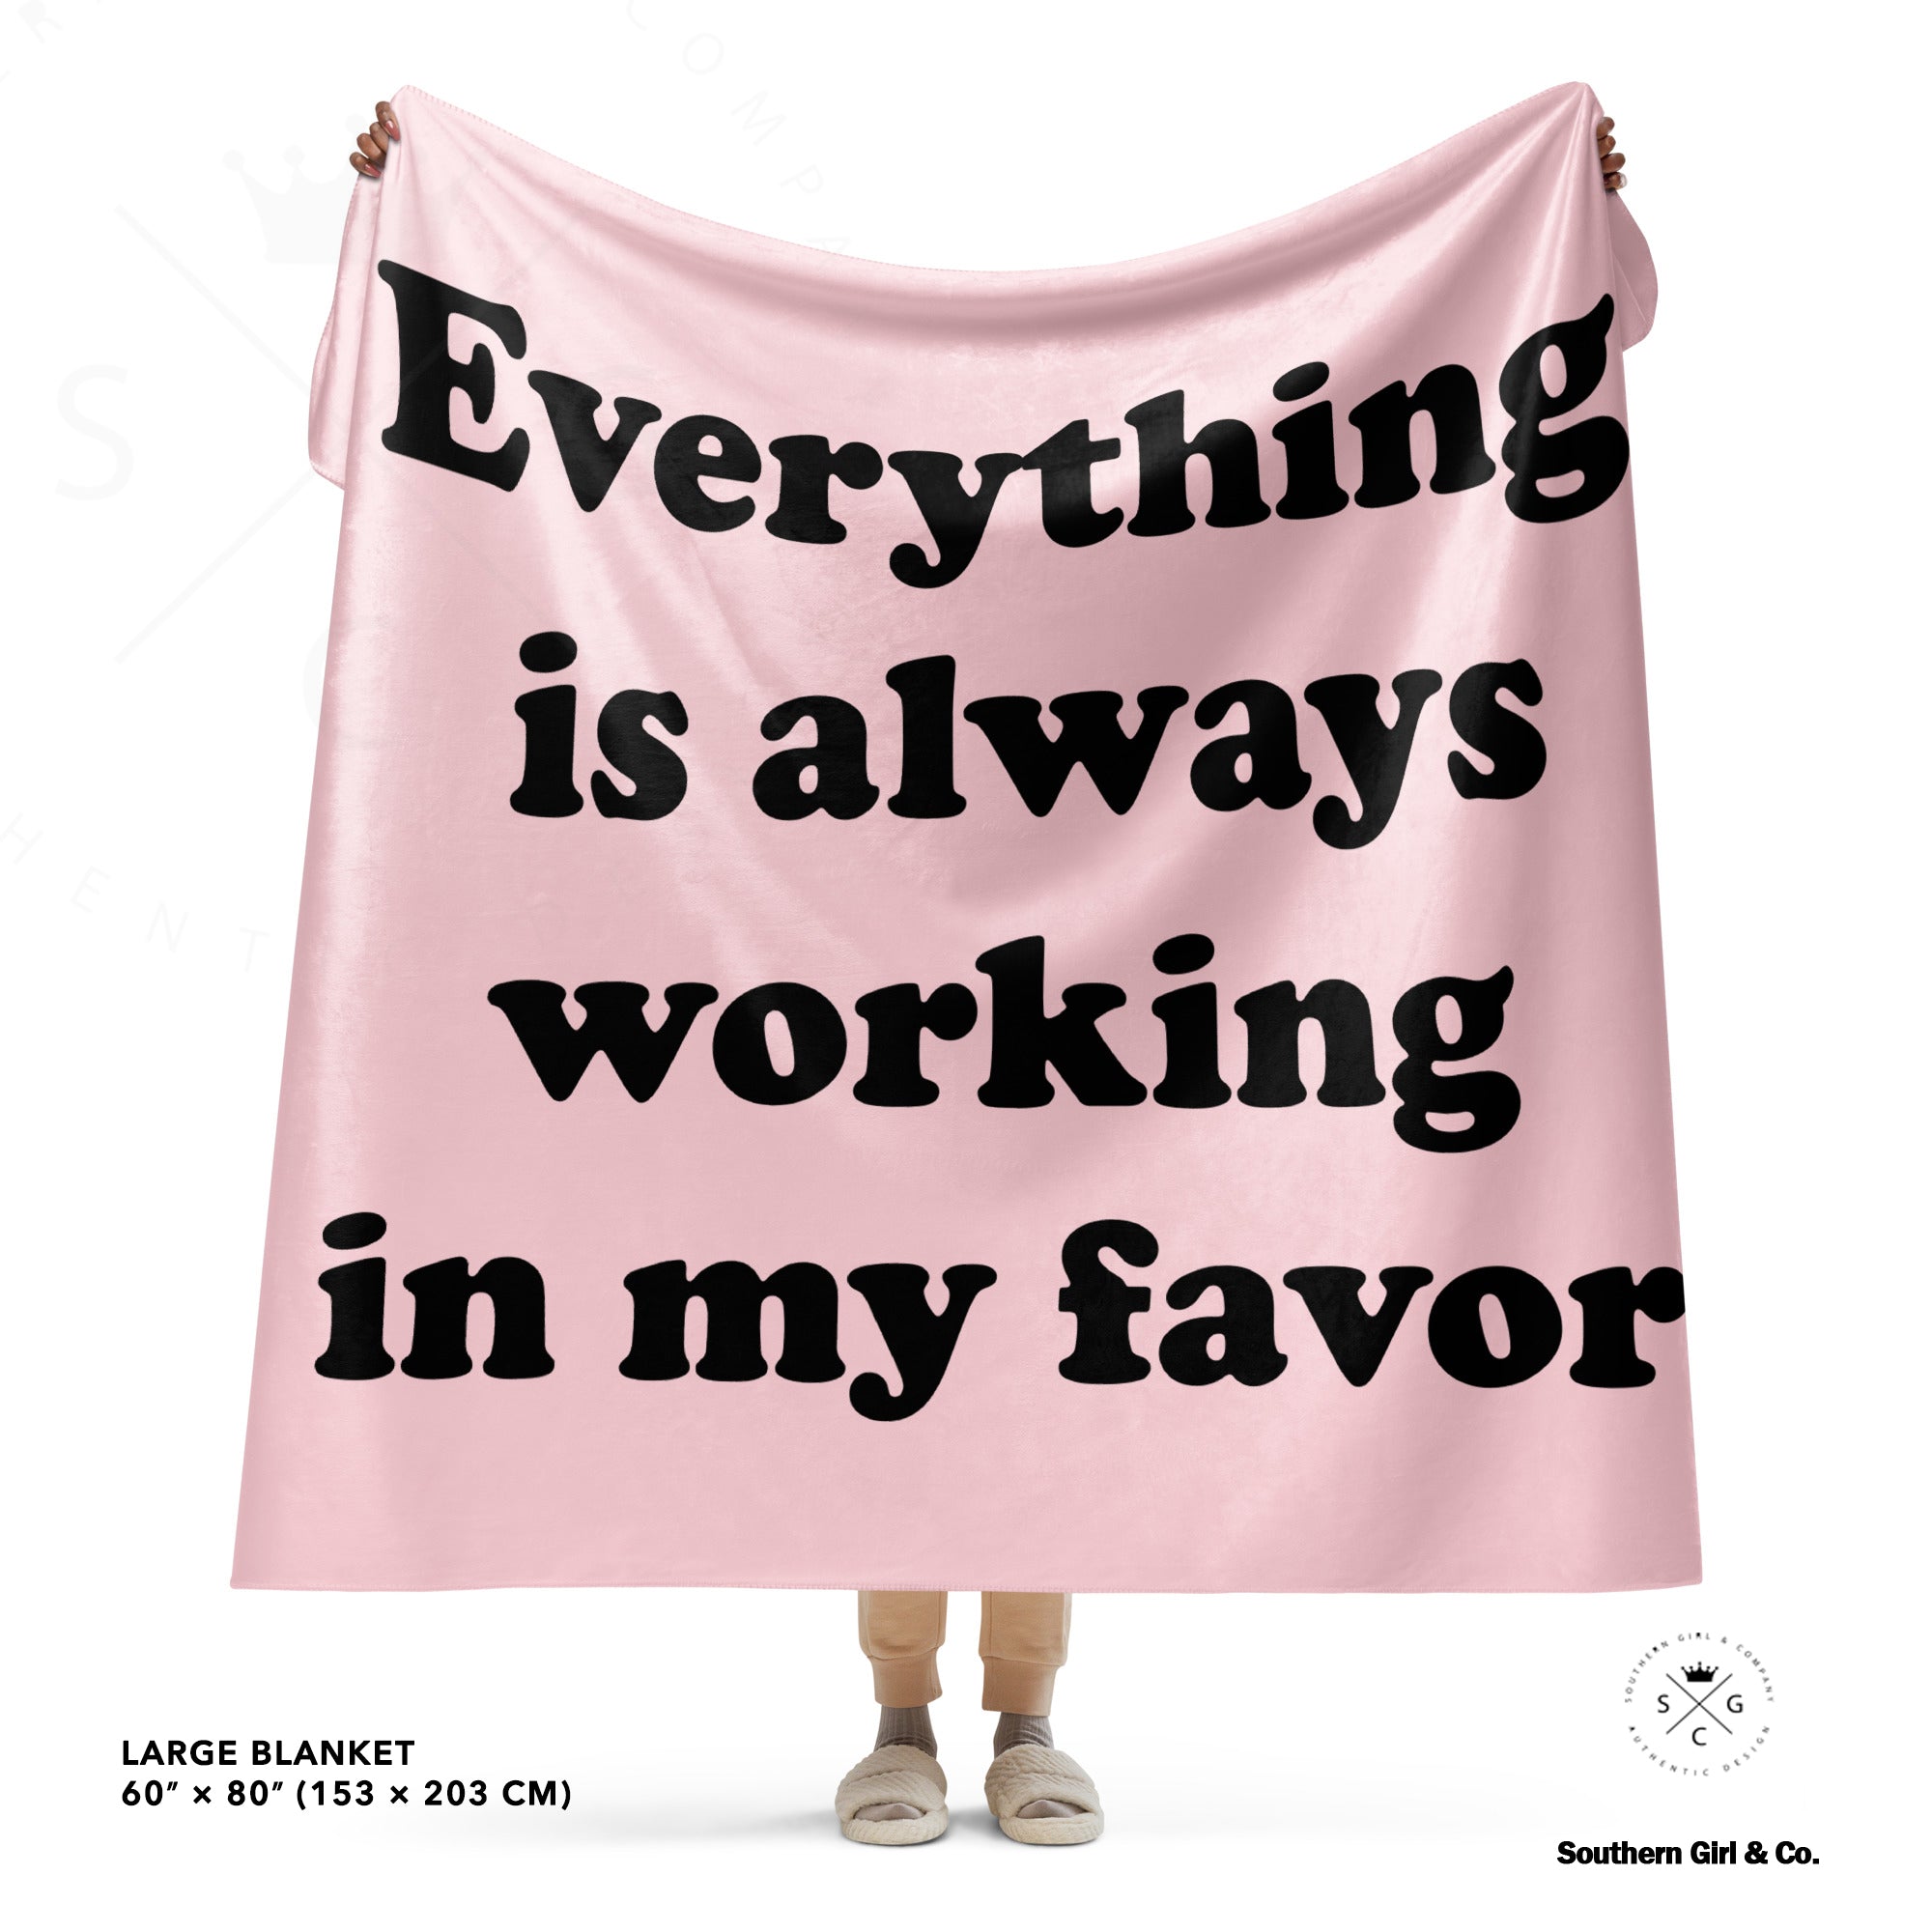 Everything In My Favor Blanket